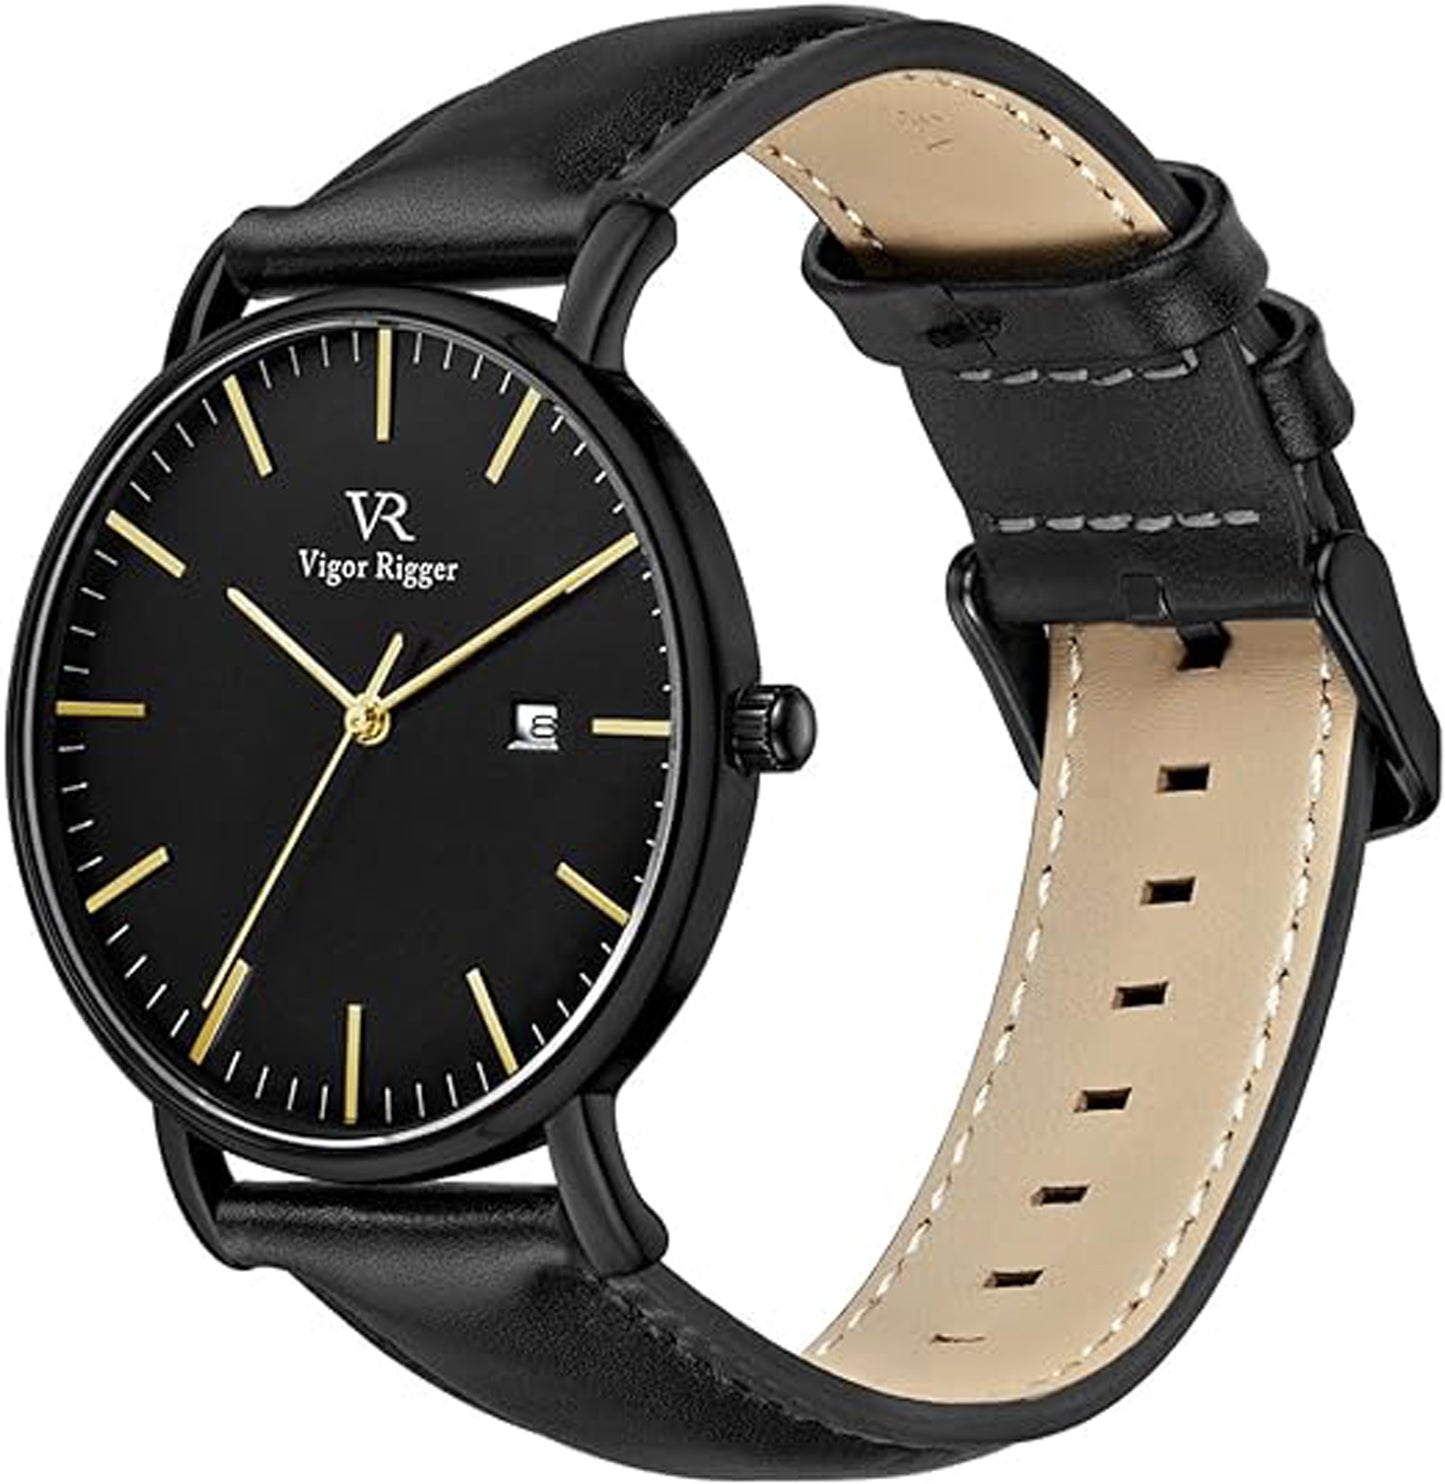 VIGOR RIGGER Men's Quartz Watches with Genuine Black Leather/Stainless Steel Watch Band, Minimalist Analog Date Display Wrist Watch, 30M Waterproof Watch with Metal